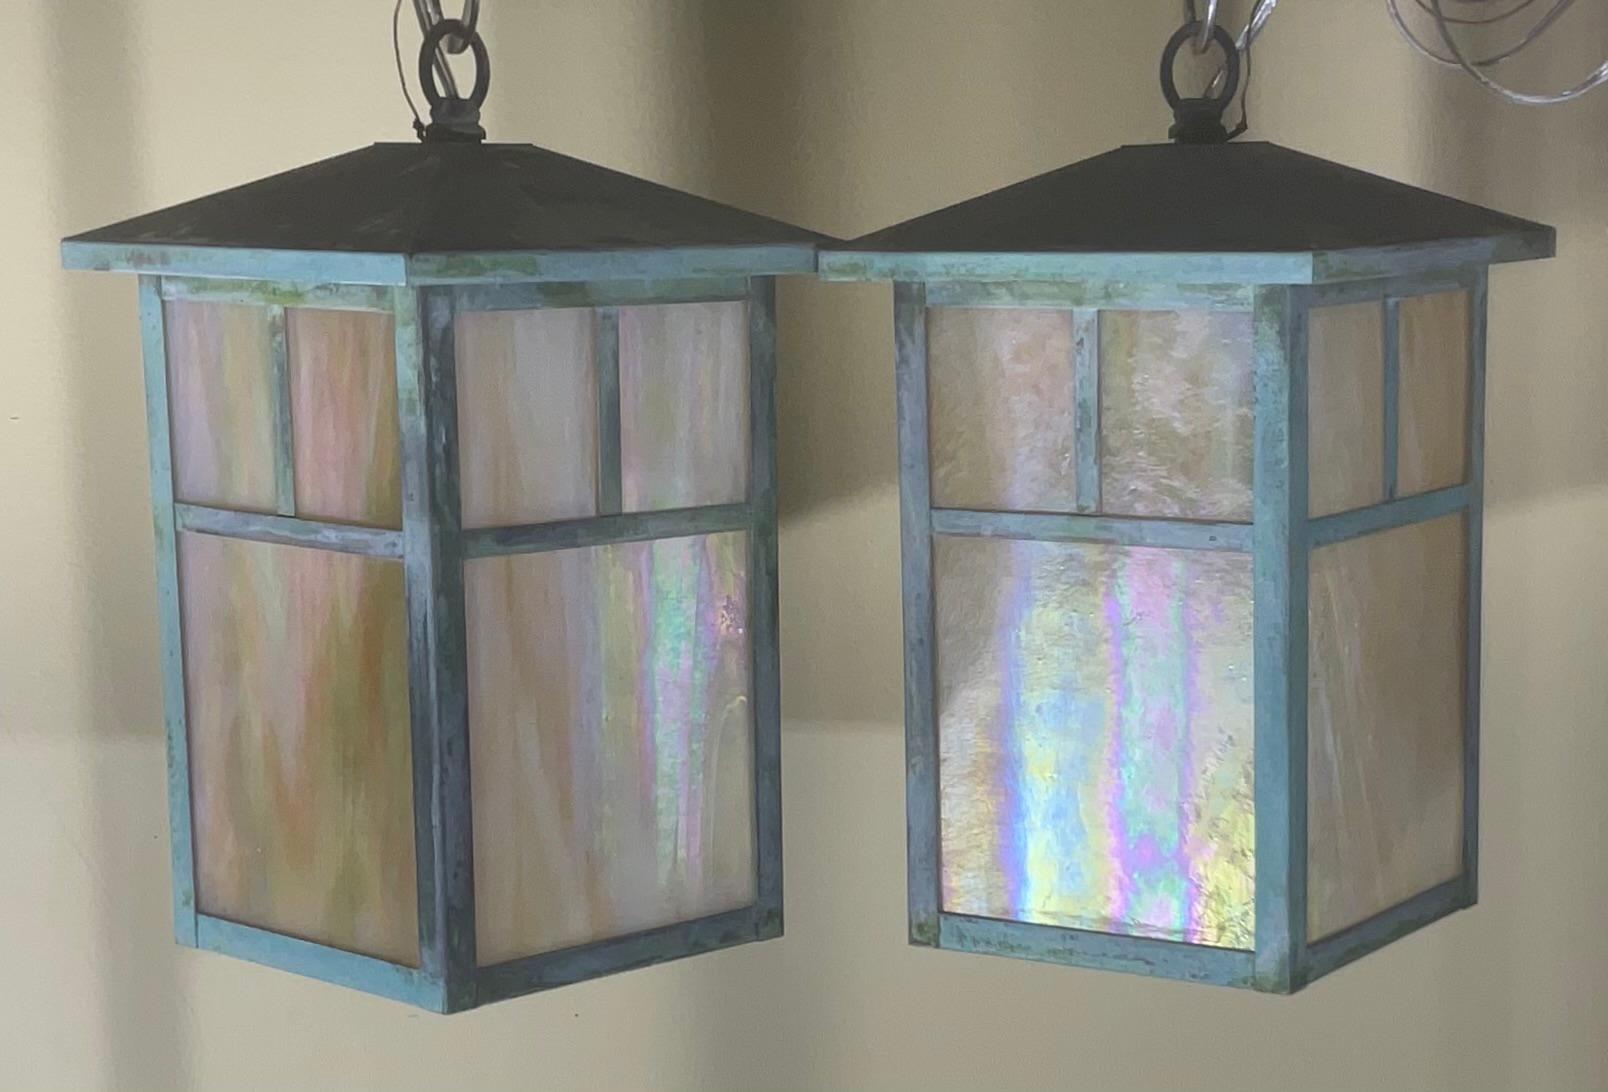  20th century Arts & Crafts pendant light in a lantern design. Features  textured beautiful art glass shades , one 60/watt light. Original nice patina.
Canopy is not included.
Will sale single light upon request.